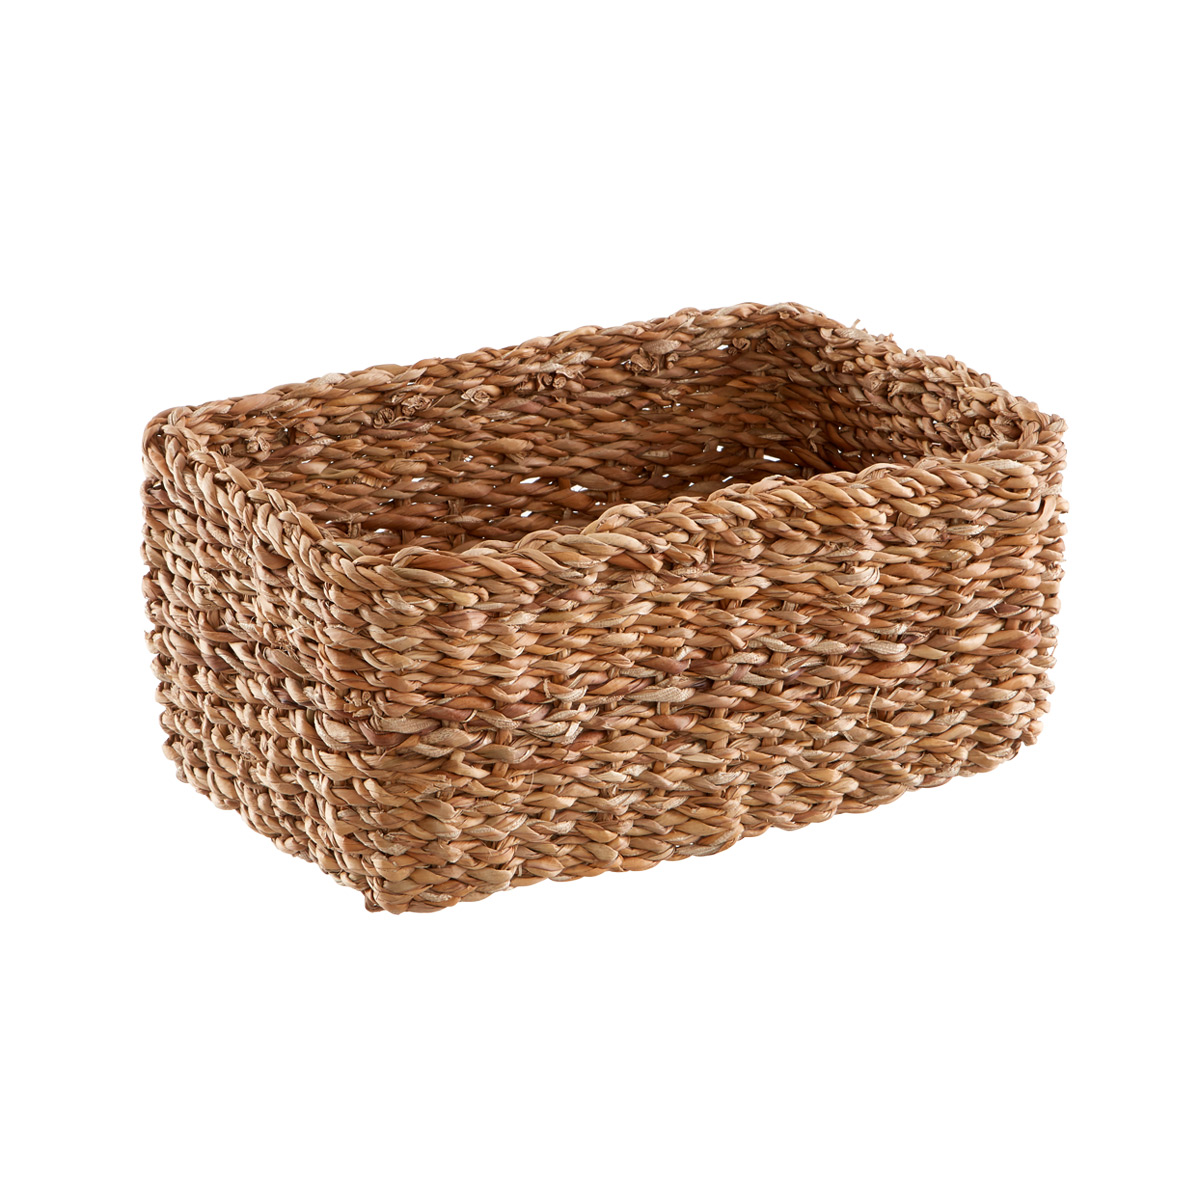 Small Rectangular Hogla Bin Natural, 7 x 11 x 5-1/4 H | The Container Store